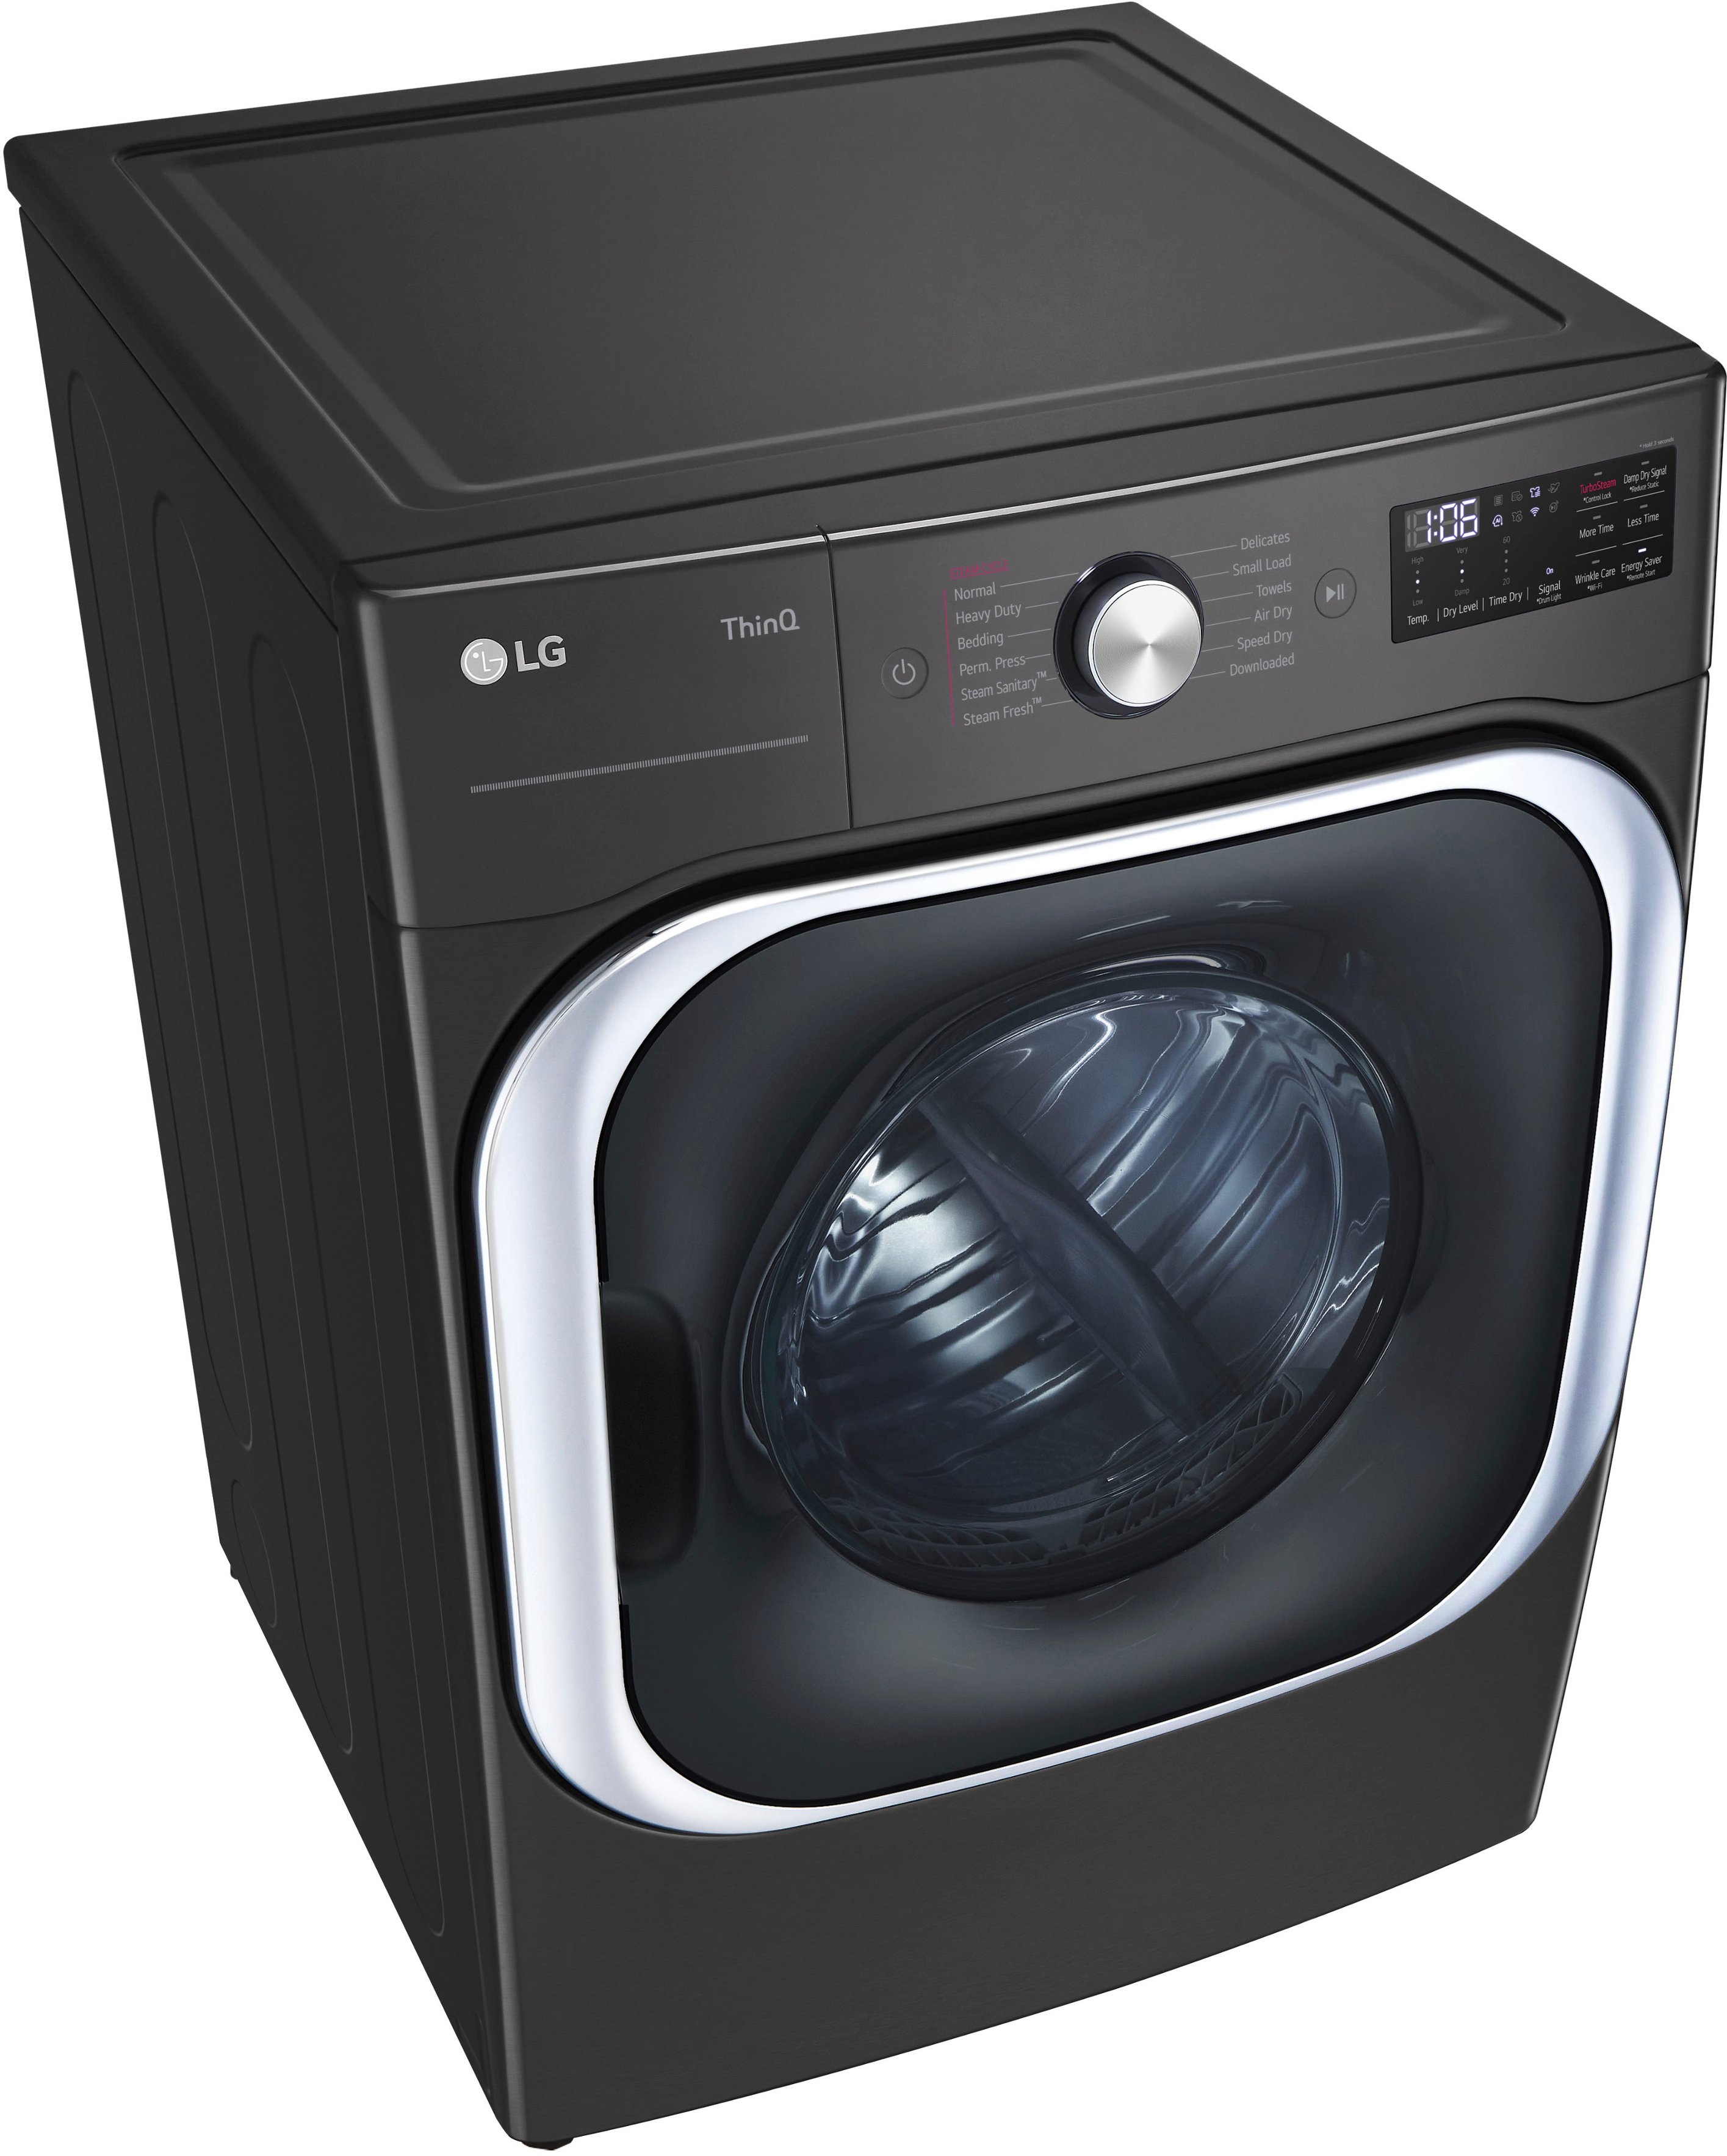 LG LG 9.0 Cu. ft. Mega Capacity Smart Wi-Fi Enabled Front Load GAS Dryer with TurboSteam and Built- inch - Black